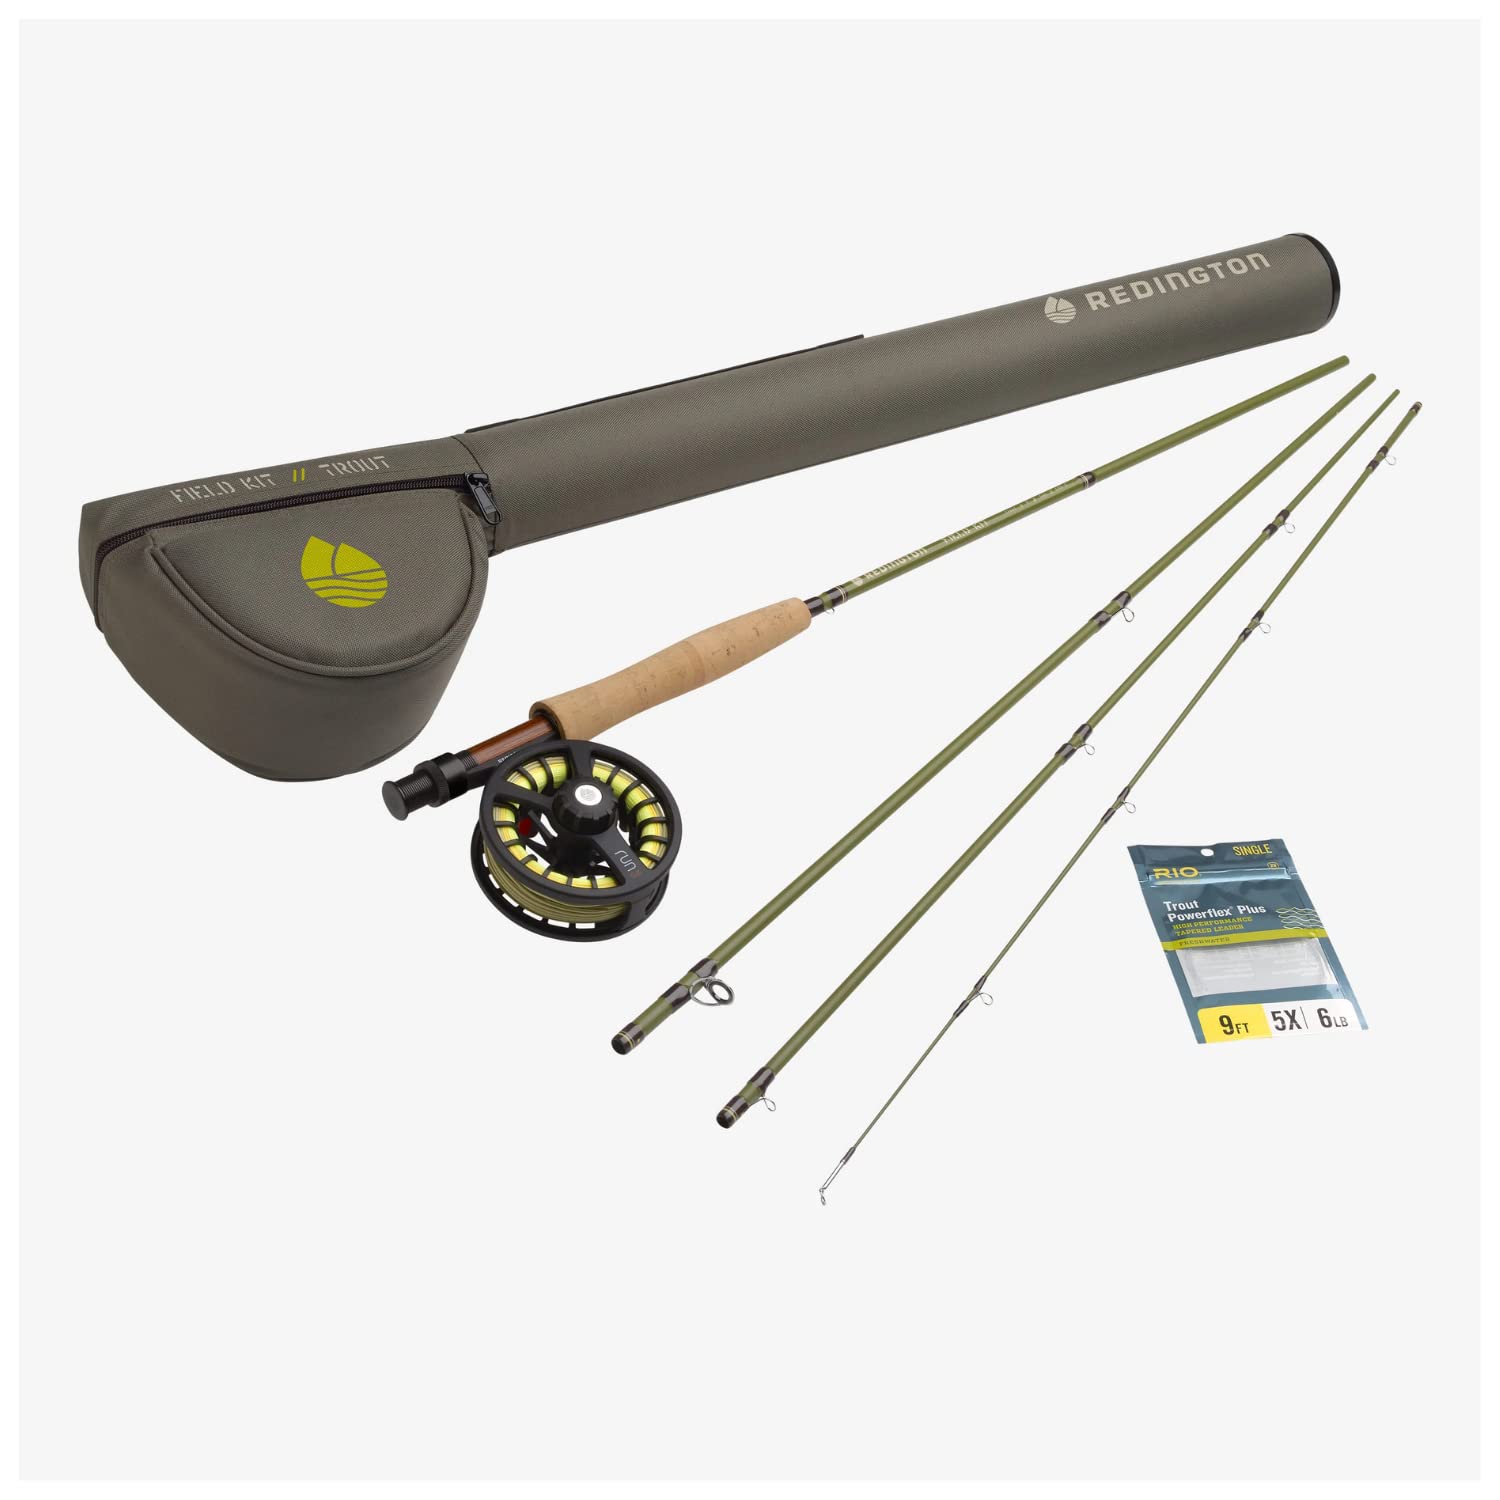 Redington Trout Fly Fishing Field Kit 9 Medium-Fast Action Rod and Run Reel Trout Fly Line Carrying Case並行輸入品